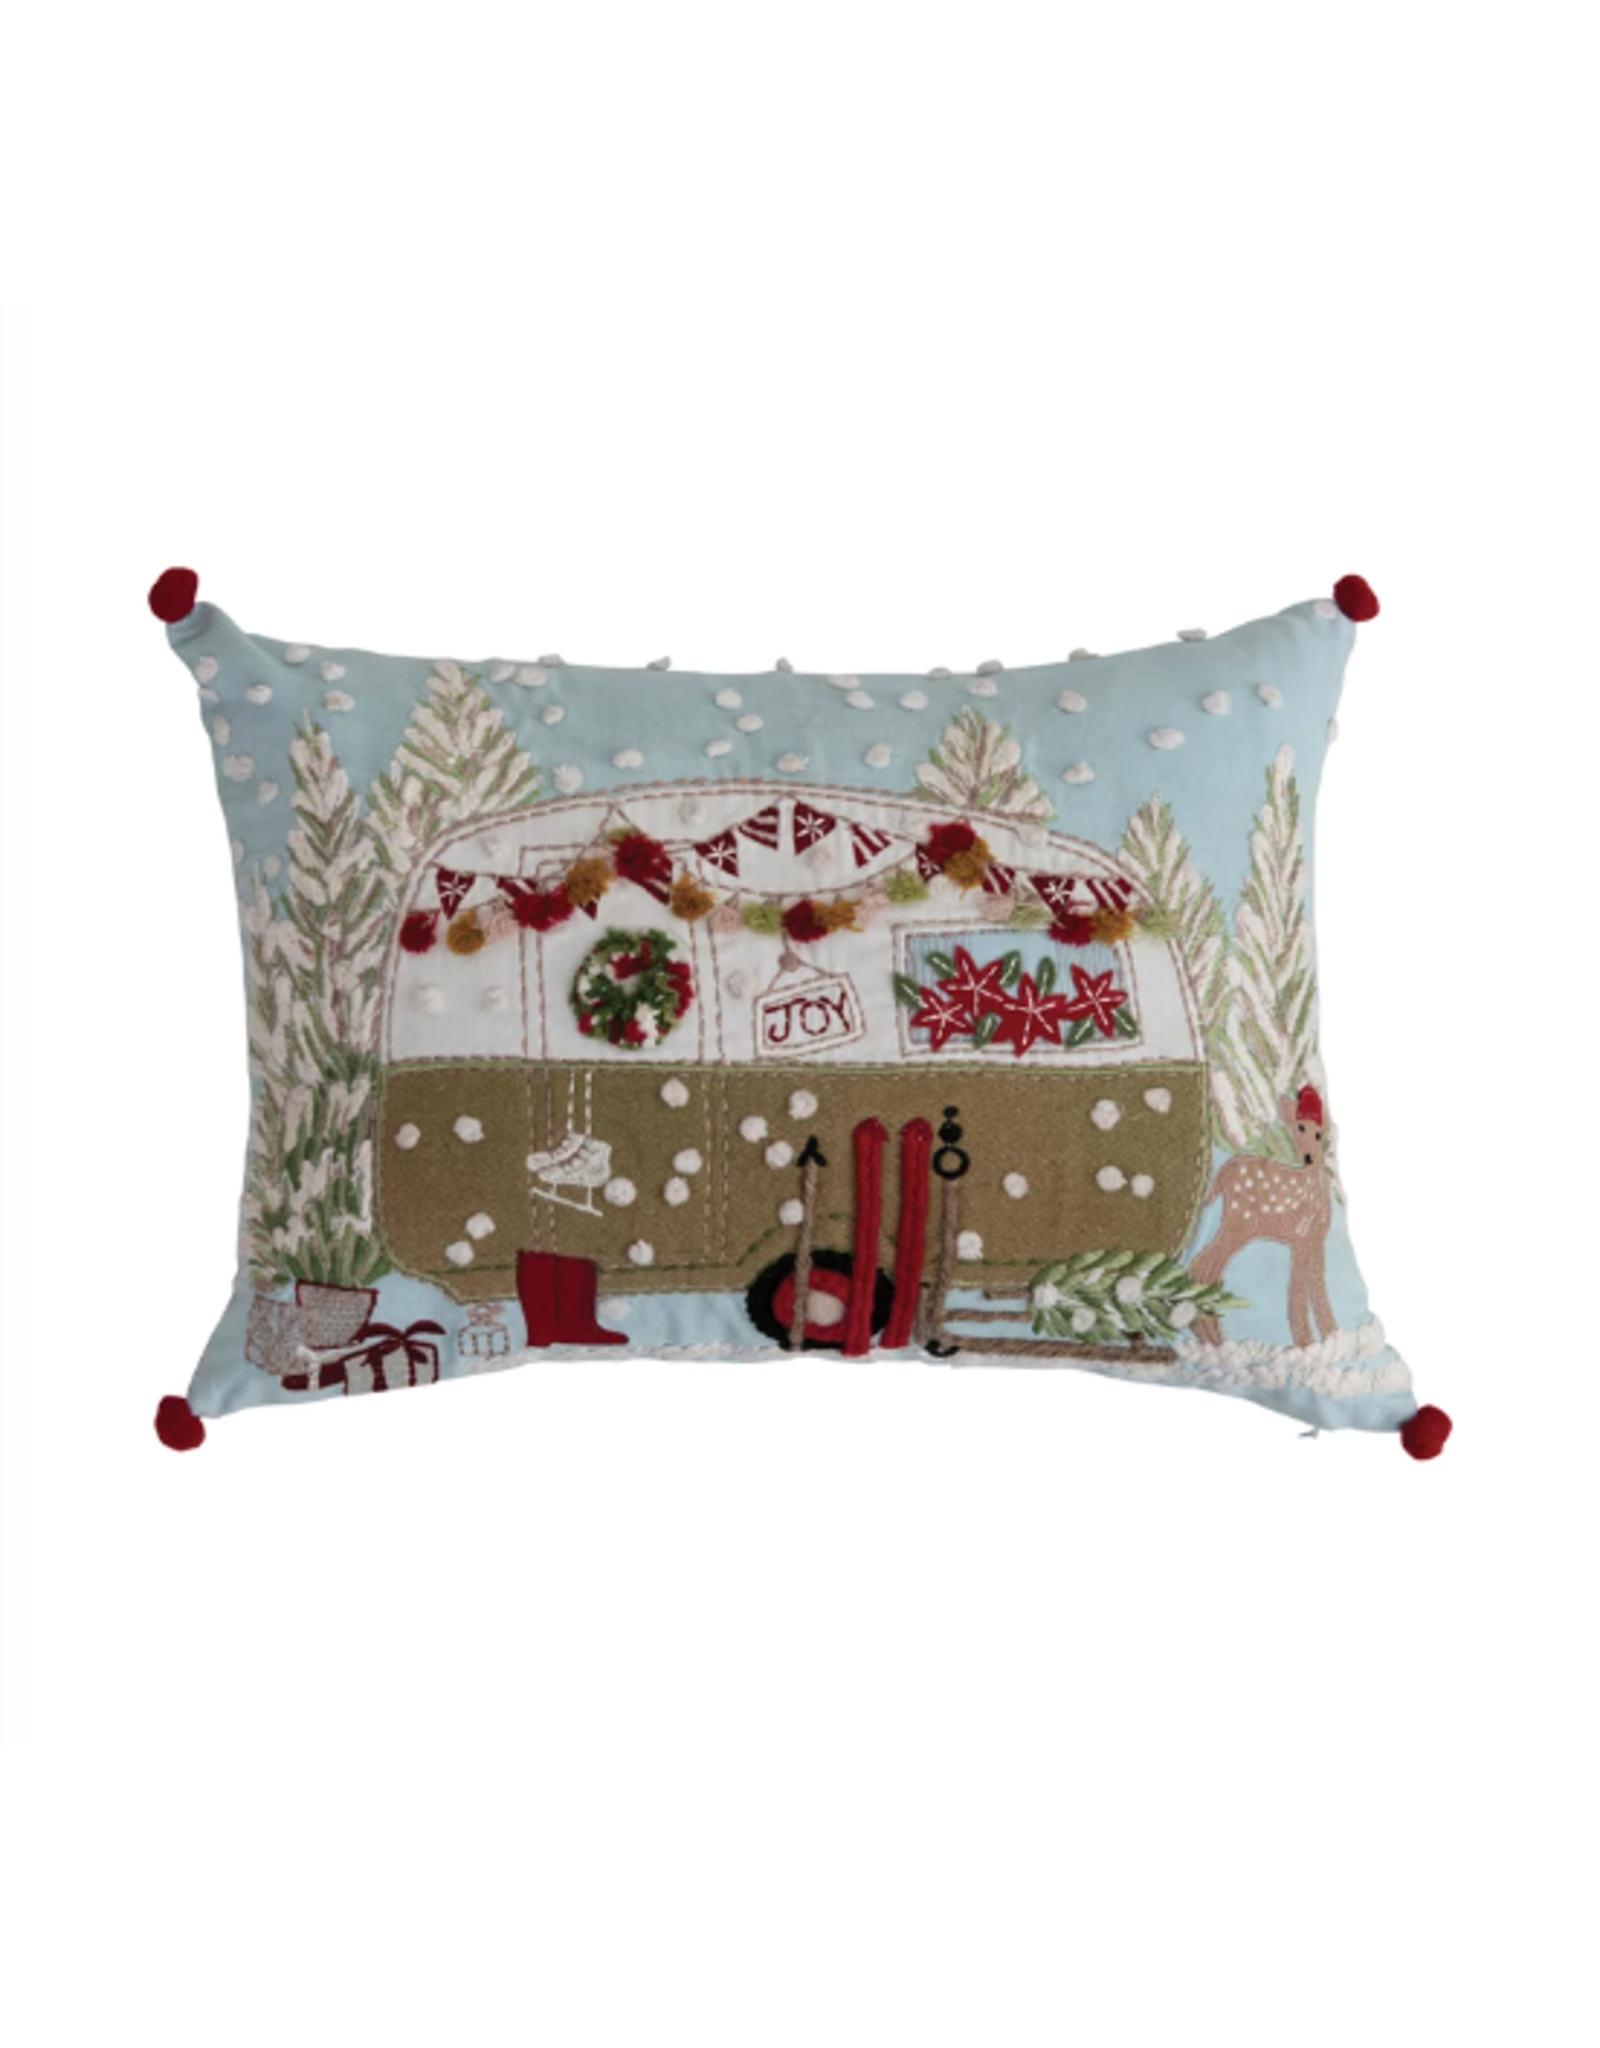 Creative Co-Op Cotton Lumbar Pillow with Camper, Embroidery, Applique & Pom Poms